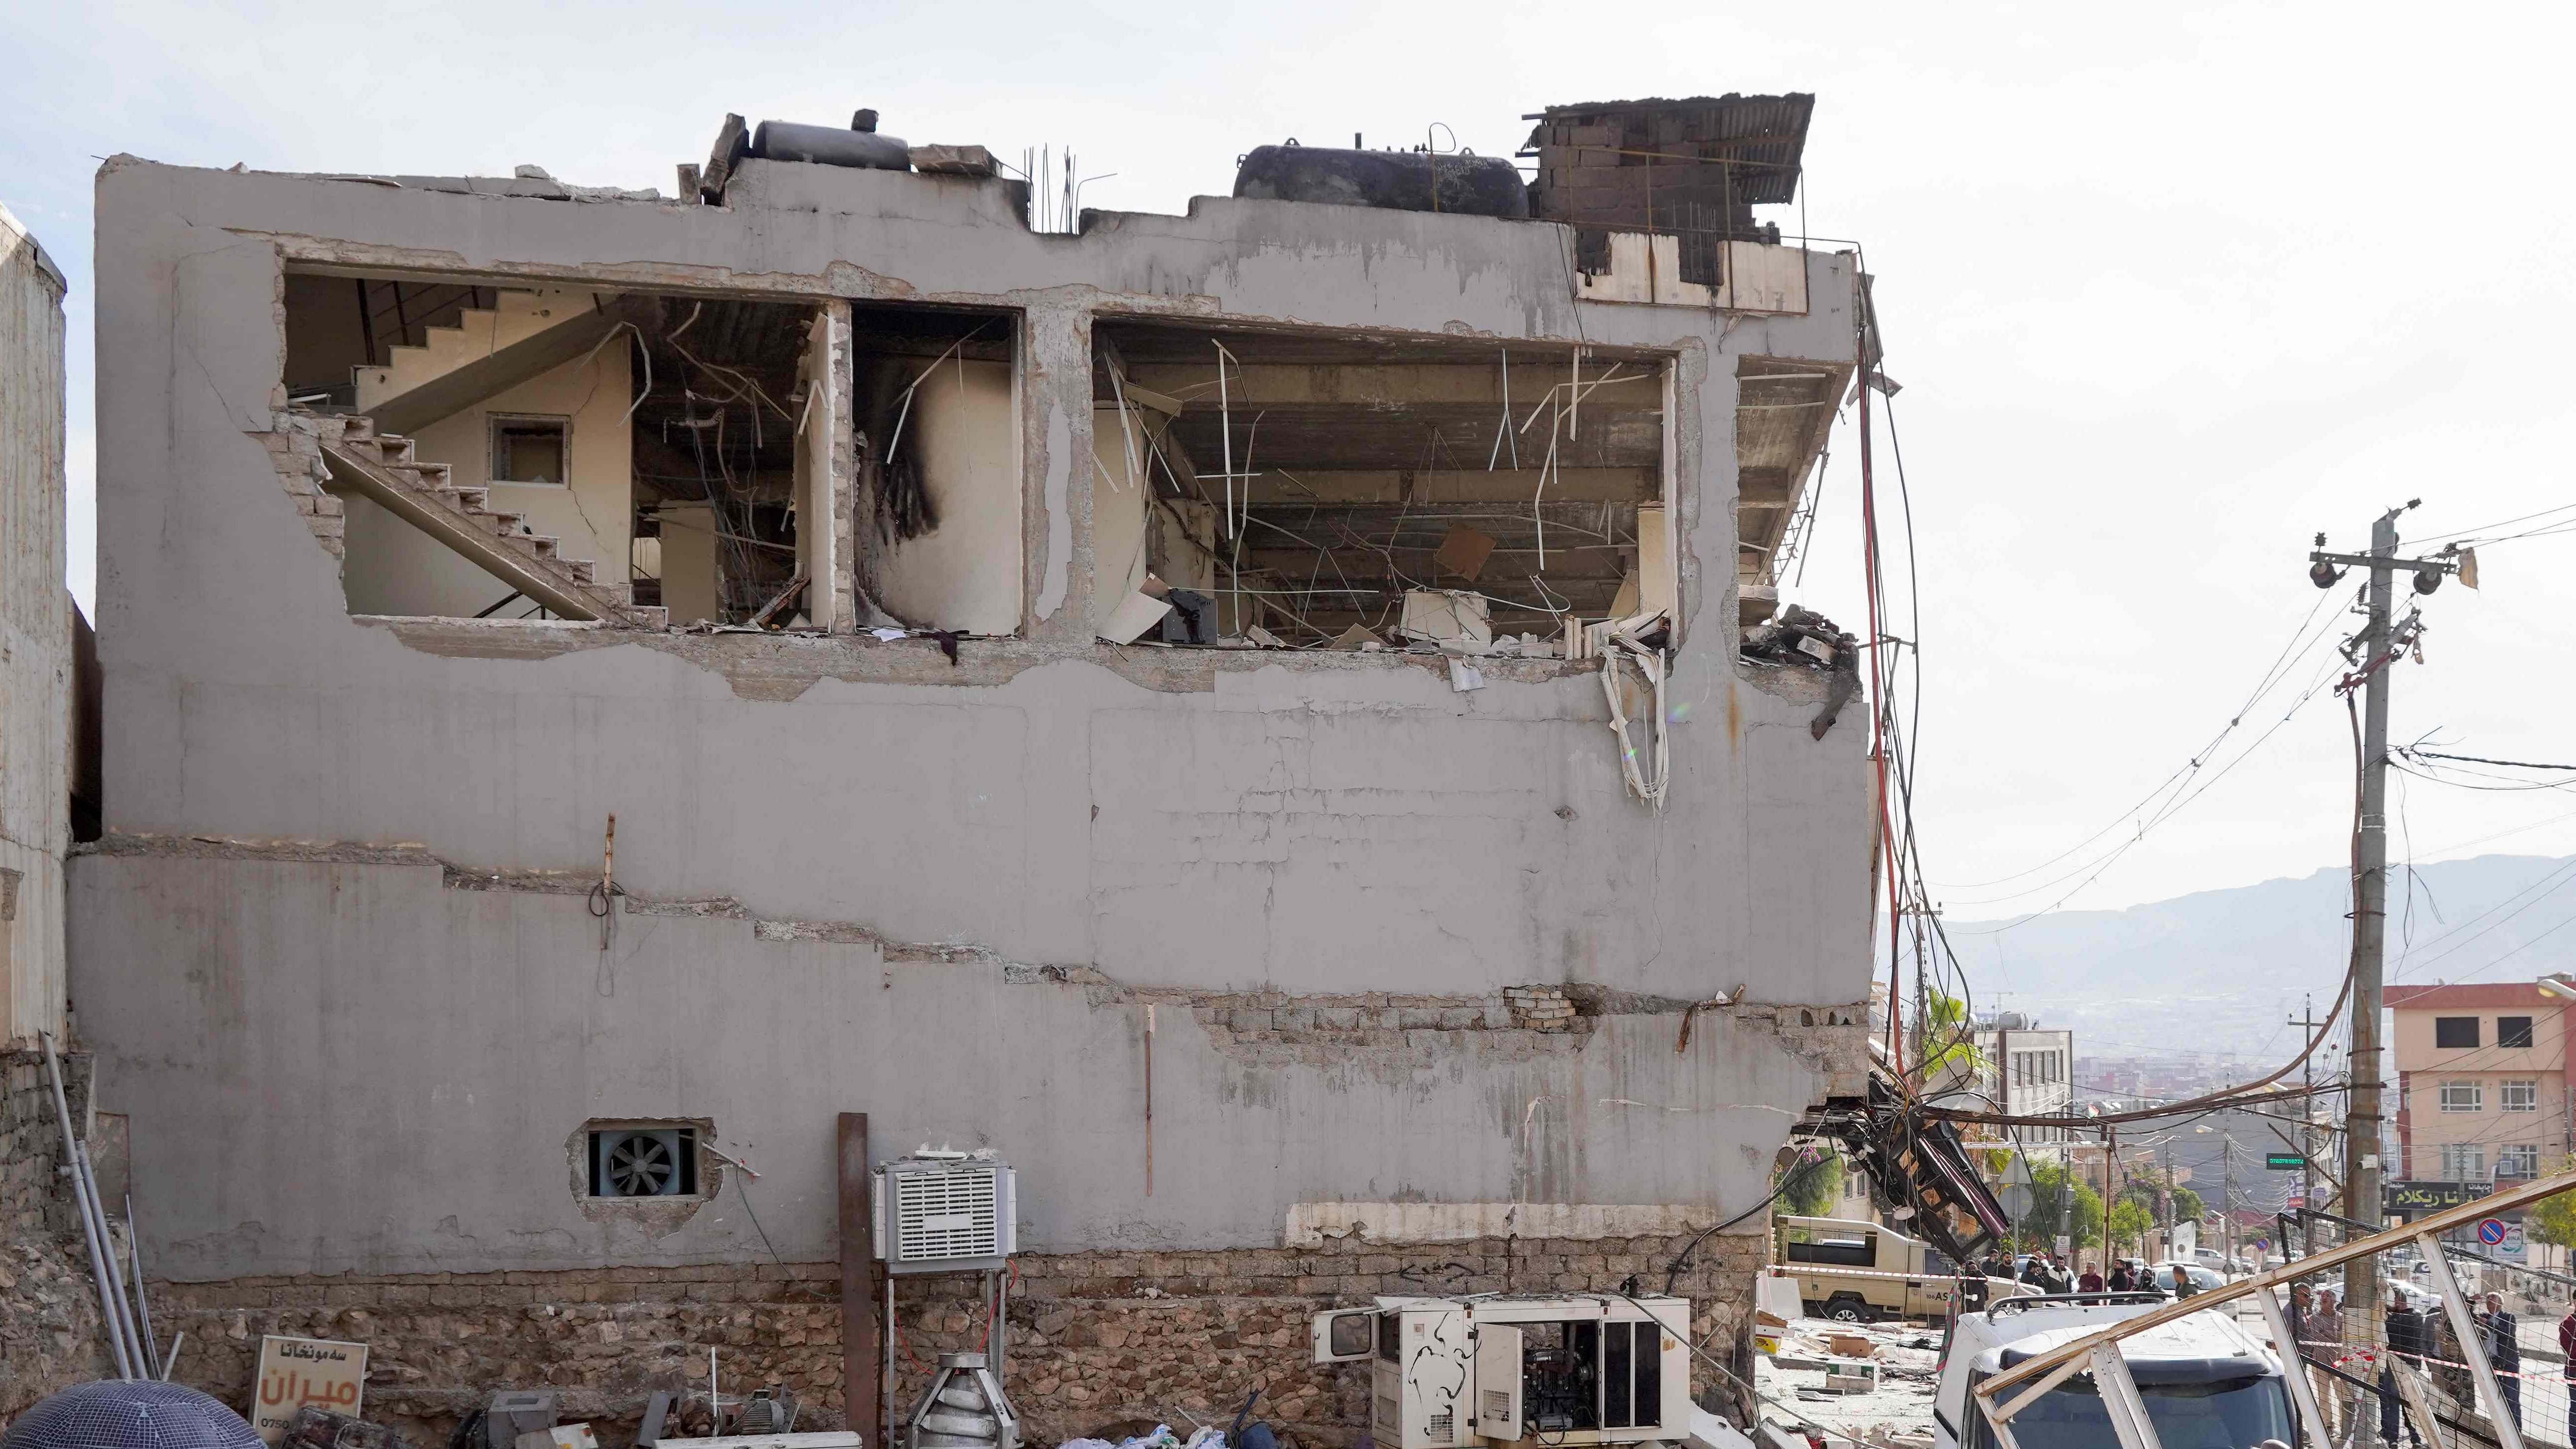 A picture shows a view of the wreckage left by a gas leak explosion at a student dormitory building in Dohuk in Iraq's autonomous Kurdistan region. Credit: AFP Photo